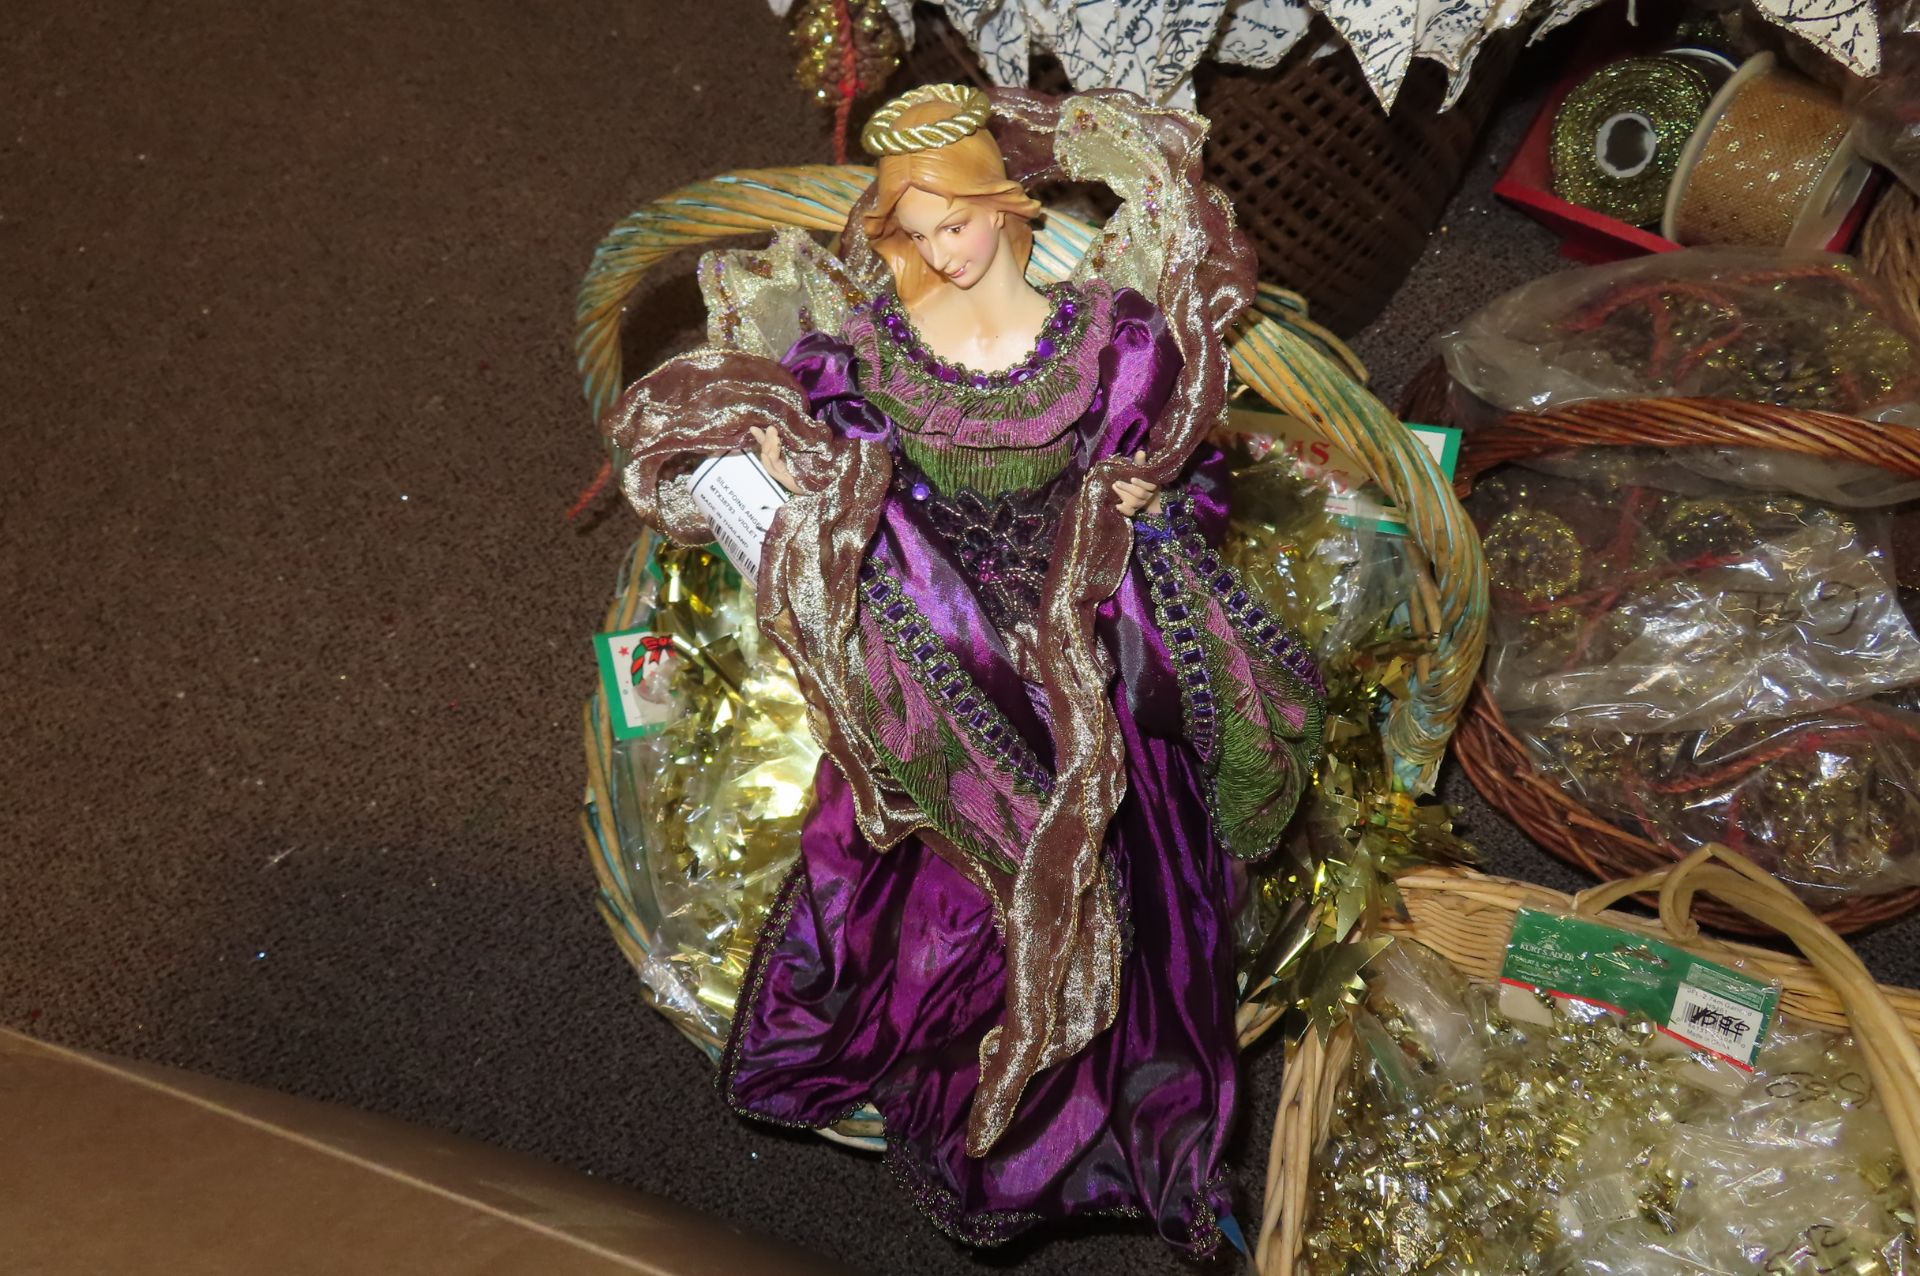 ASST. FLOWERS, JEWELED FLOWERS, ORNAMENTS, (1) ANGEL, (3) TIN AND (1) WICKER… - Image 5 of 9